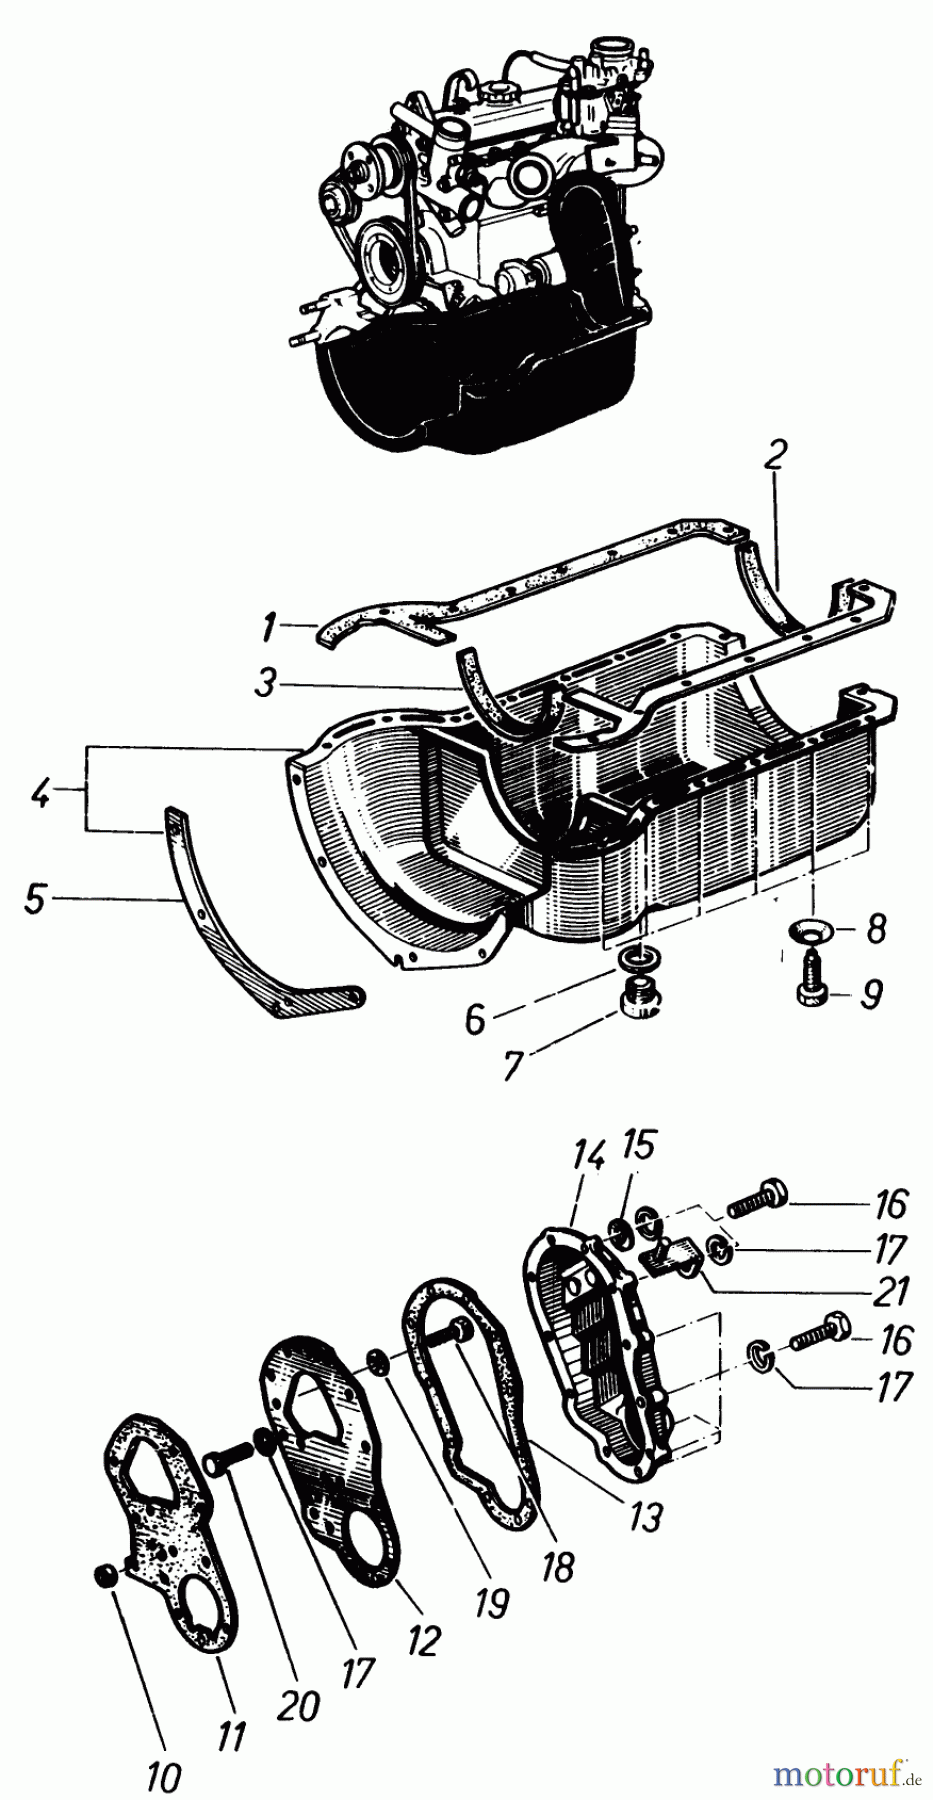  Toro Neu Mowers, Lawn & Garden Tractor Seite 2 81-20RG01 (D-250) - Toro D-250 10-Speed Tractor, 1978 OIL PAN AND TIMING CHAIN COVER